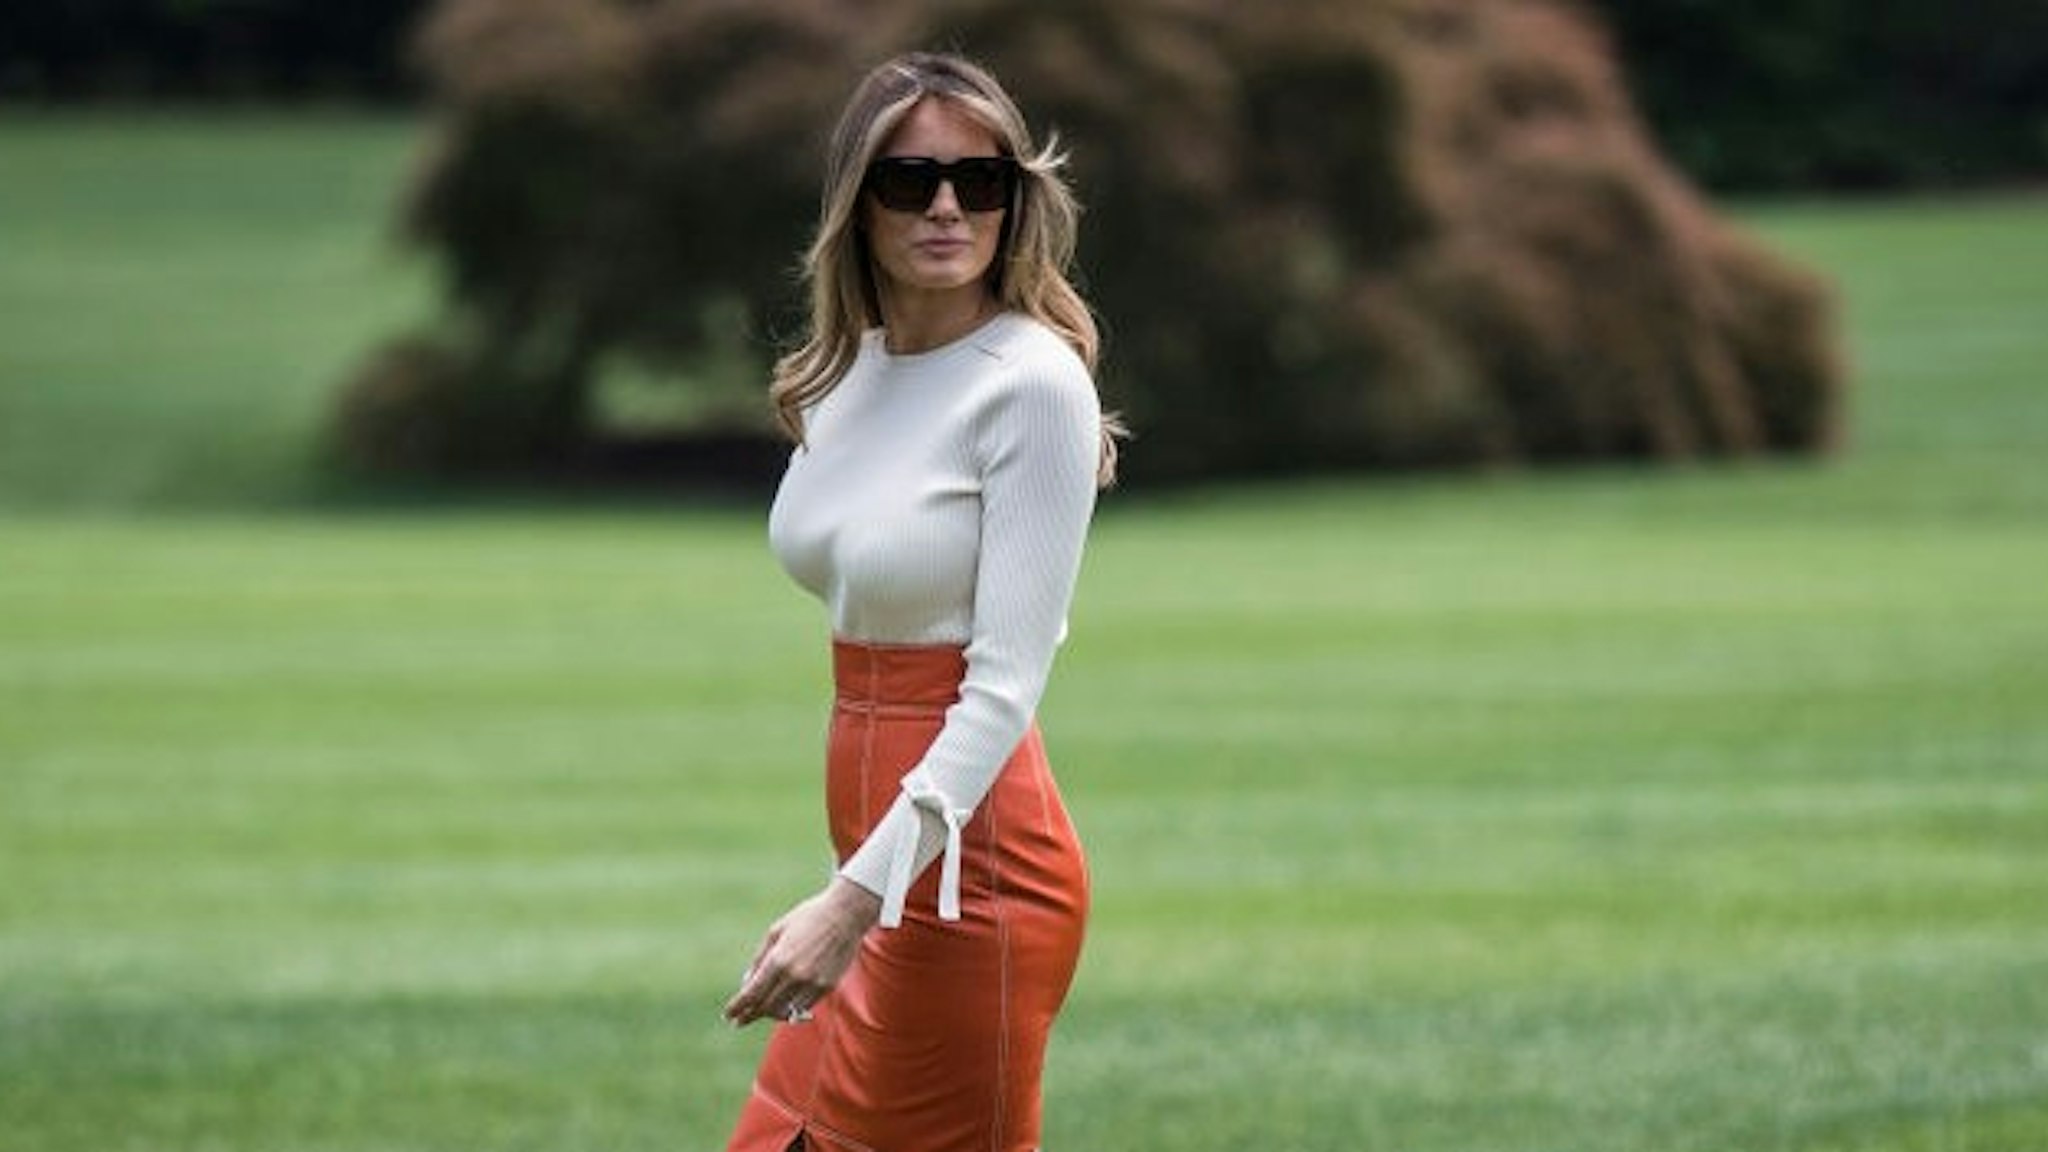 WASHINGTON, DC - MAY 19: President Donald Trump and first lady Melania Trump walk across the South Lawn to board Marine One and fly to Andrews Air Force Base, Md., at the White House in Washington, DC on Friday, May 19, 2017. Trump is leaving for his first foreign trip, visiting Saudi Arabia, Israel, Vatican, and a pair of summits in Brussels and Sicily. (Photo by